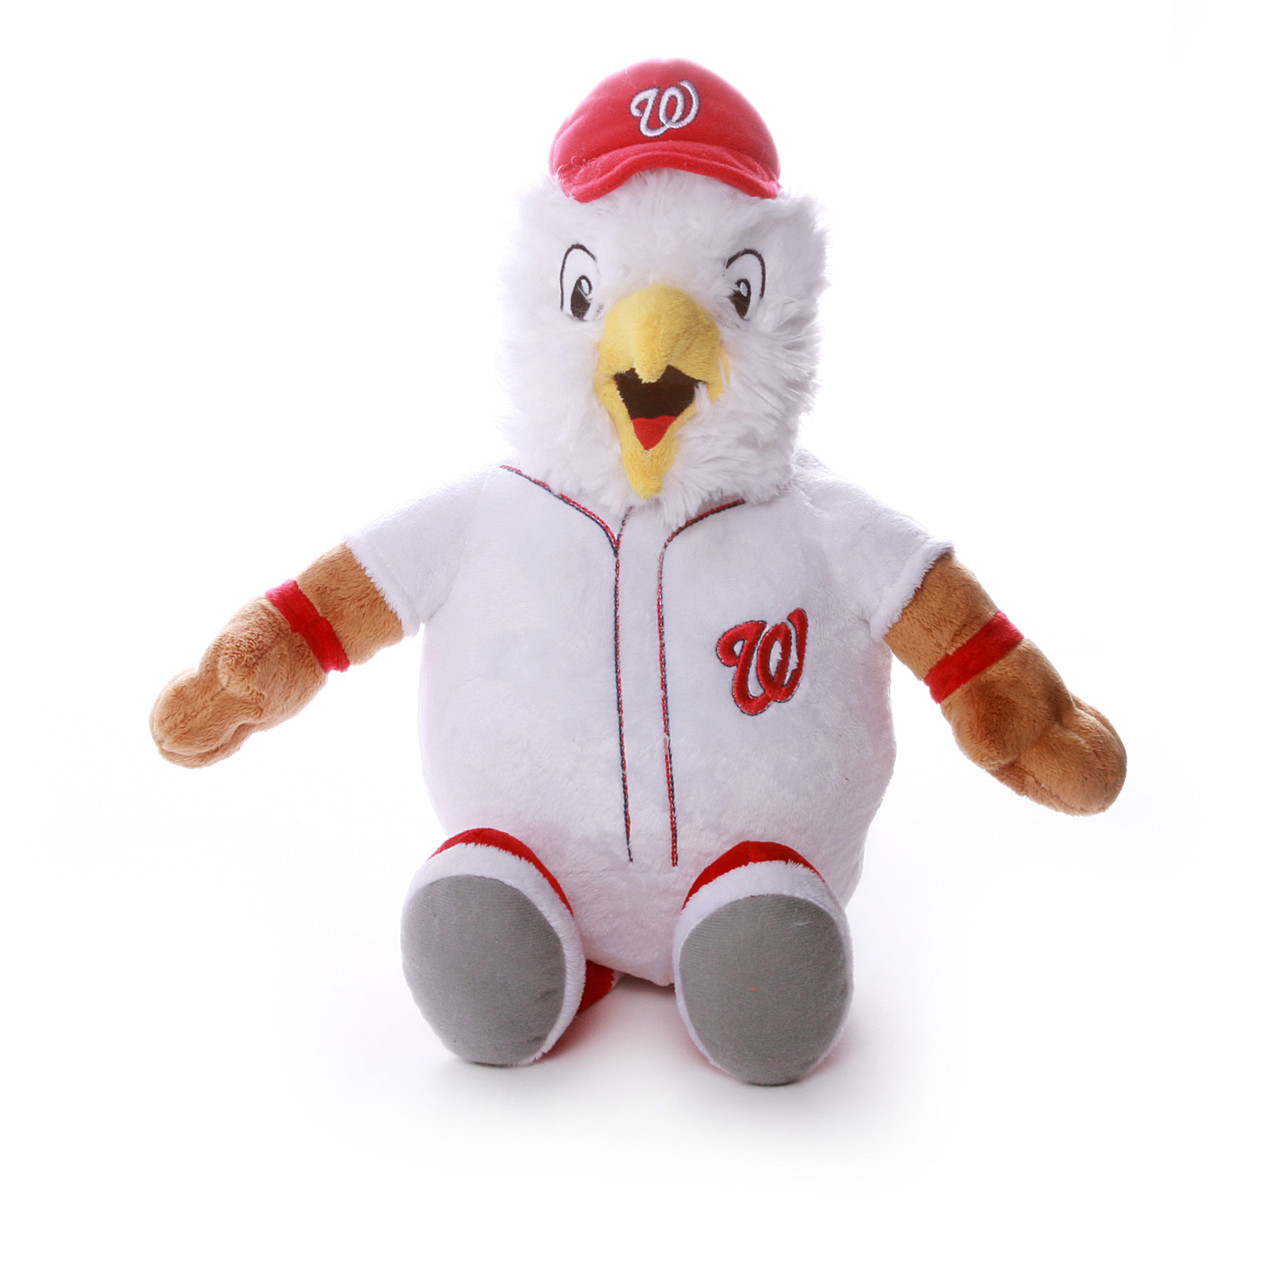 Mascot for Washington Nationals: What is it?